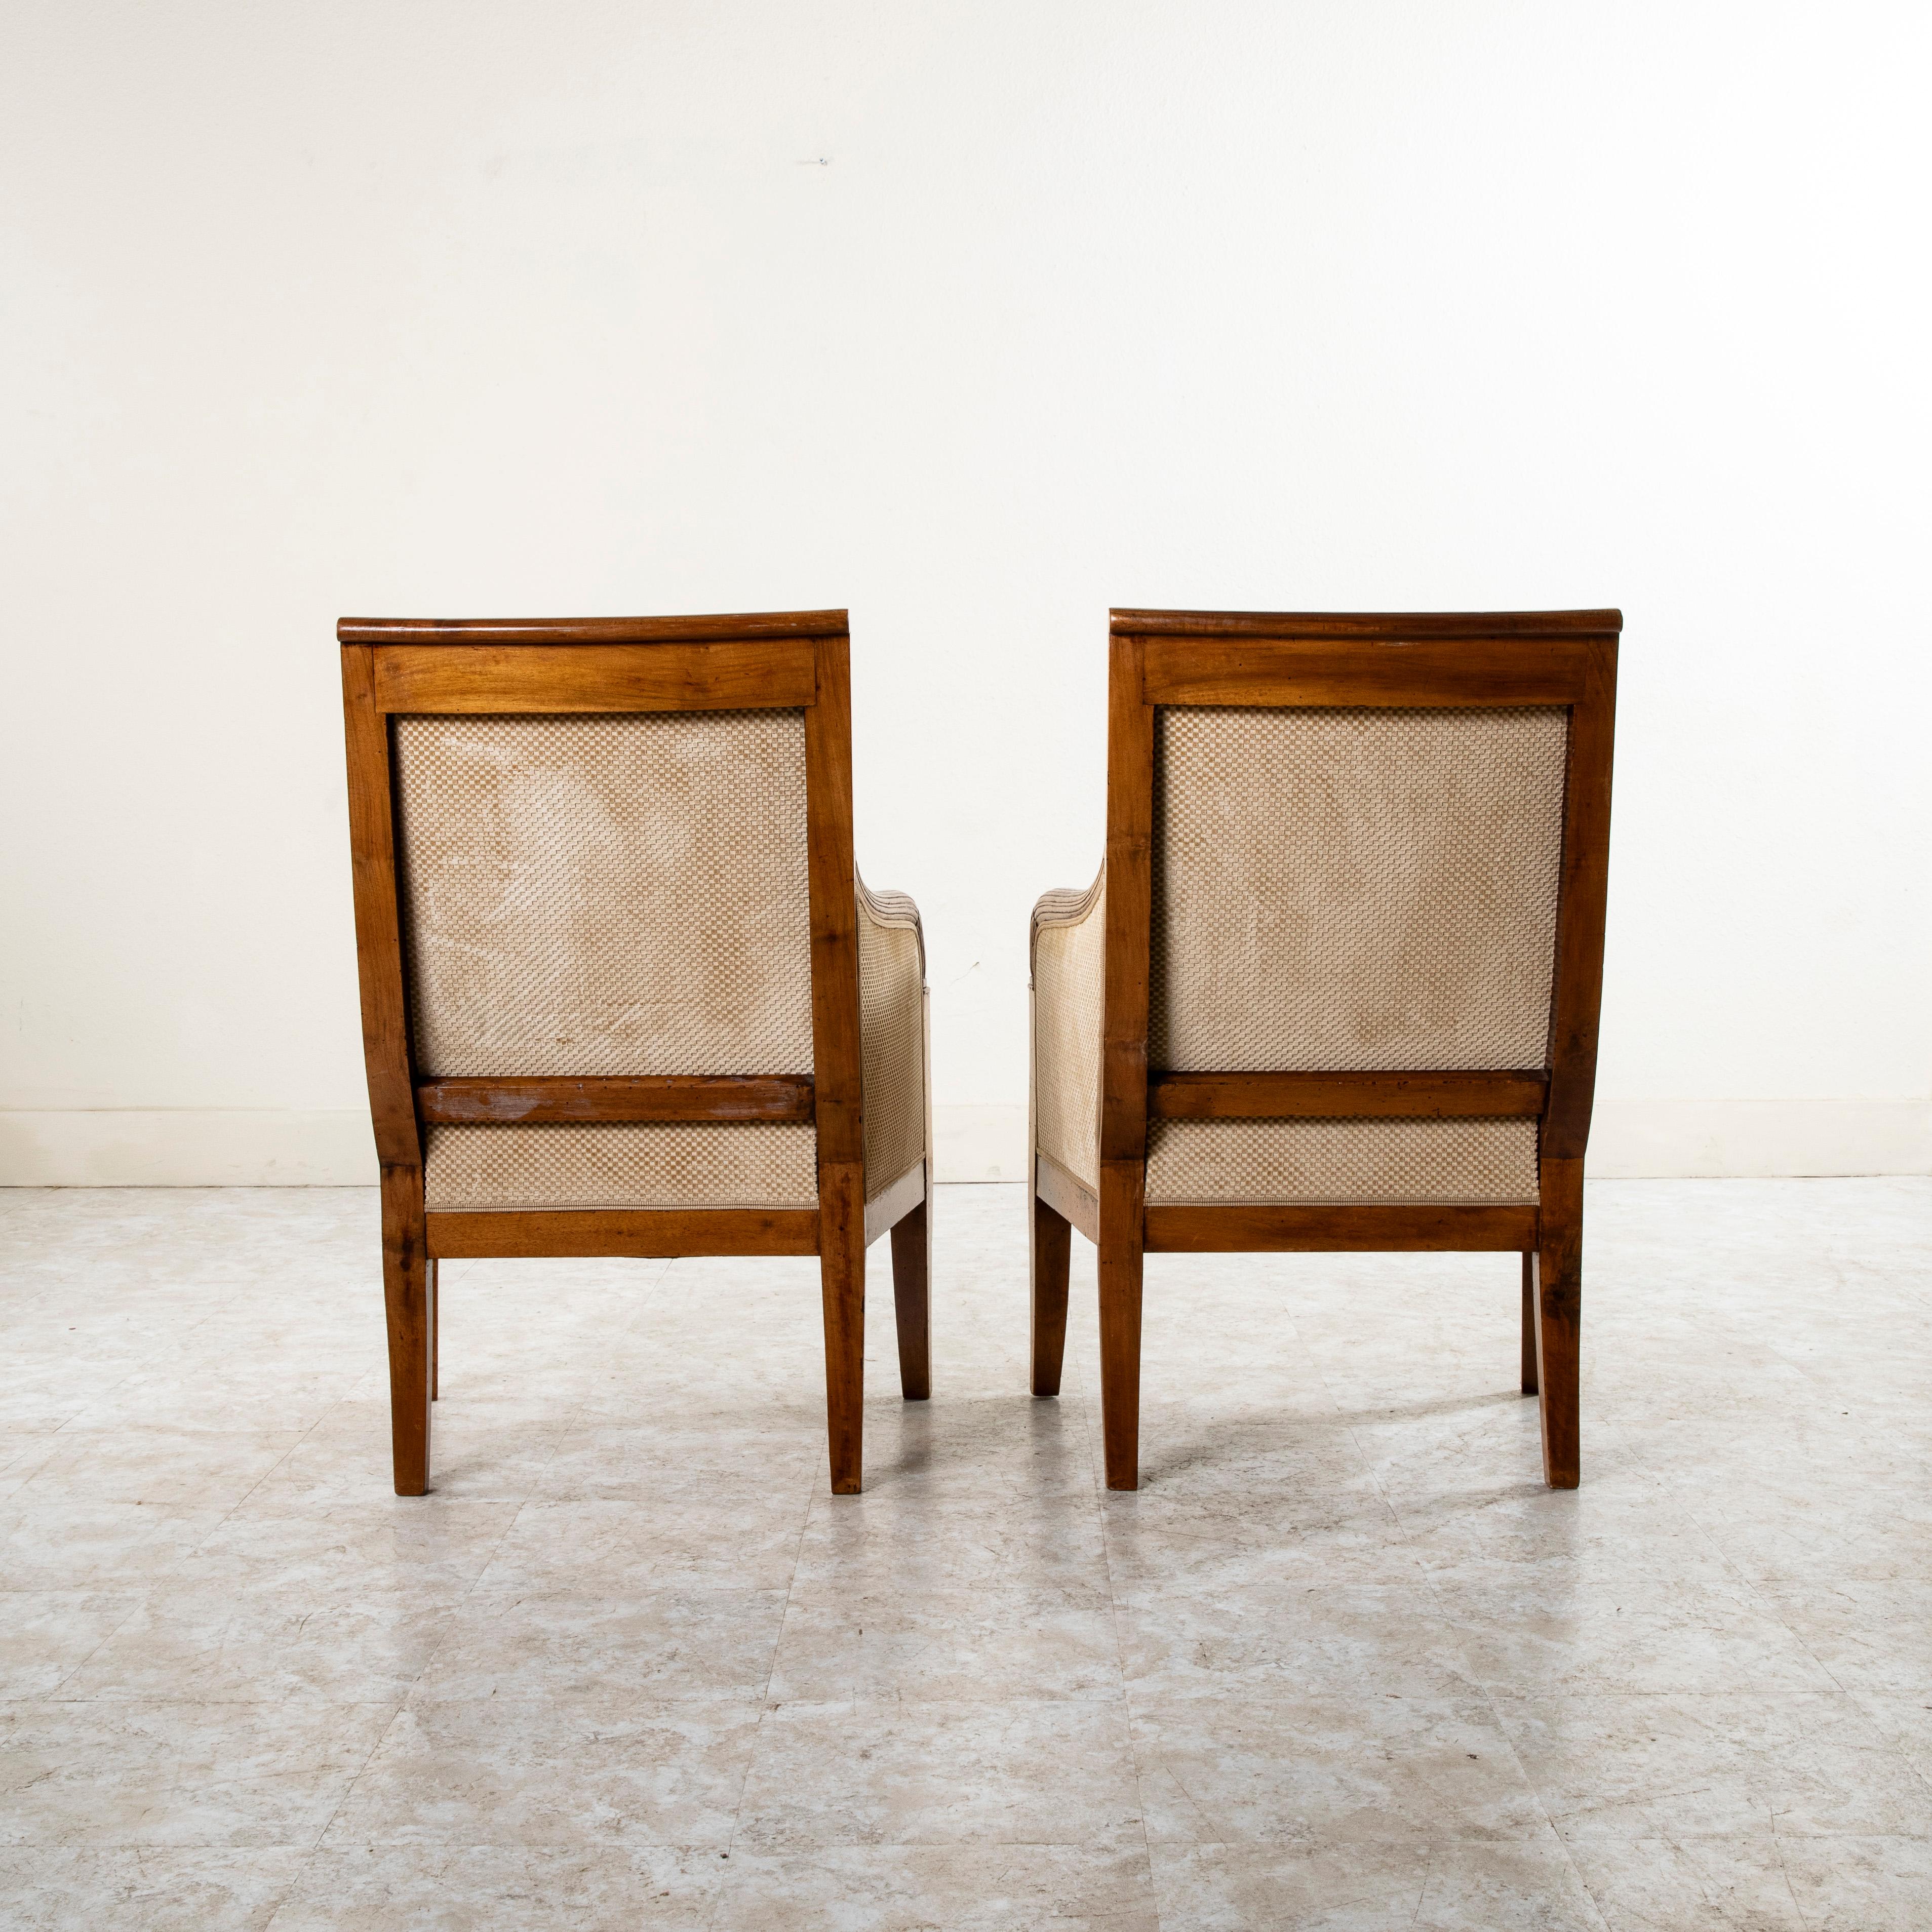 Pair of 19th Century French Empire Period Hand Carved Walnut Bergeres, Armchairs For Sale 1